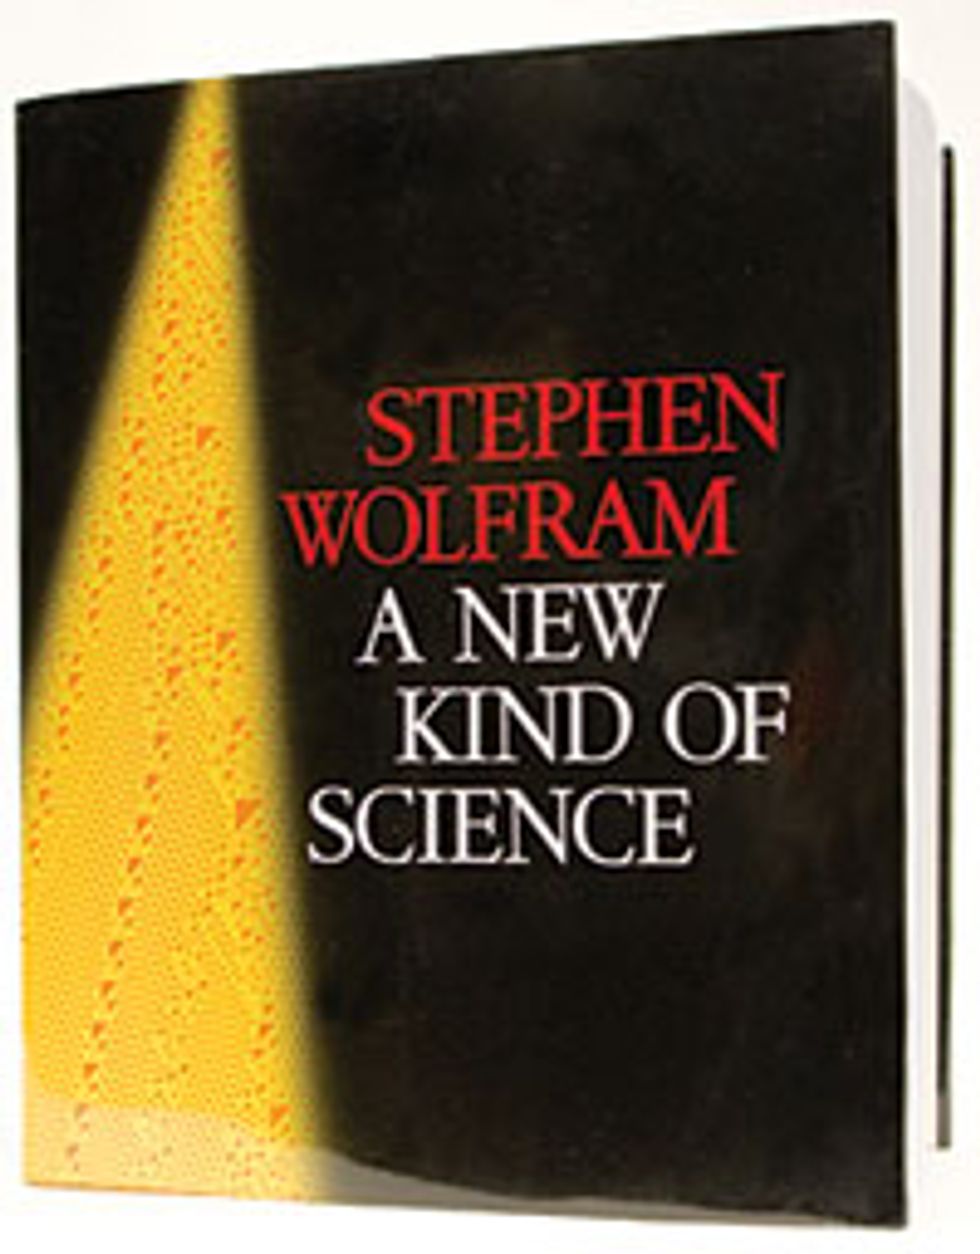 photo of book cover 'A New Kind of Science'